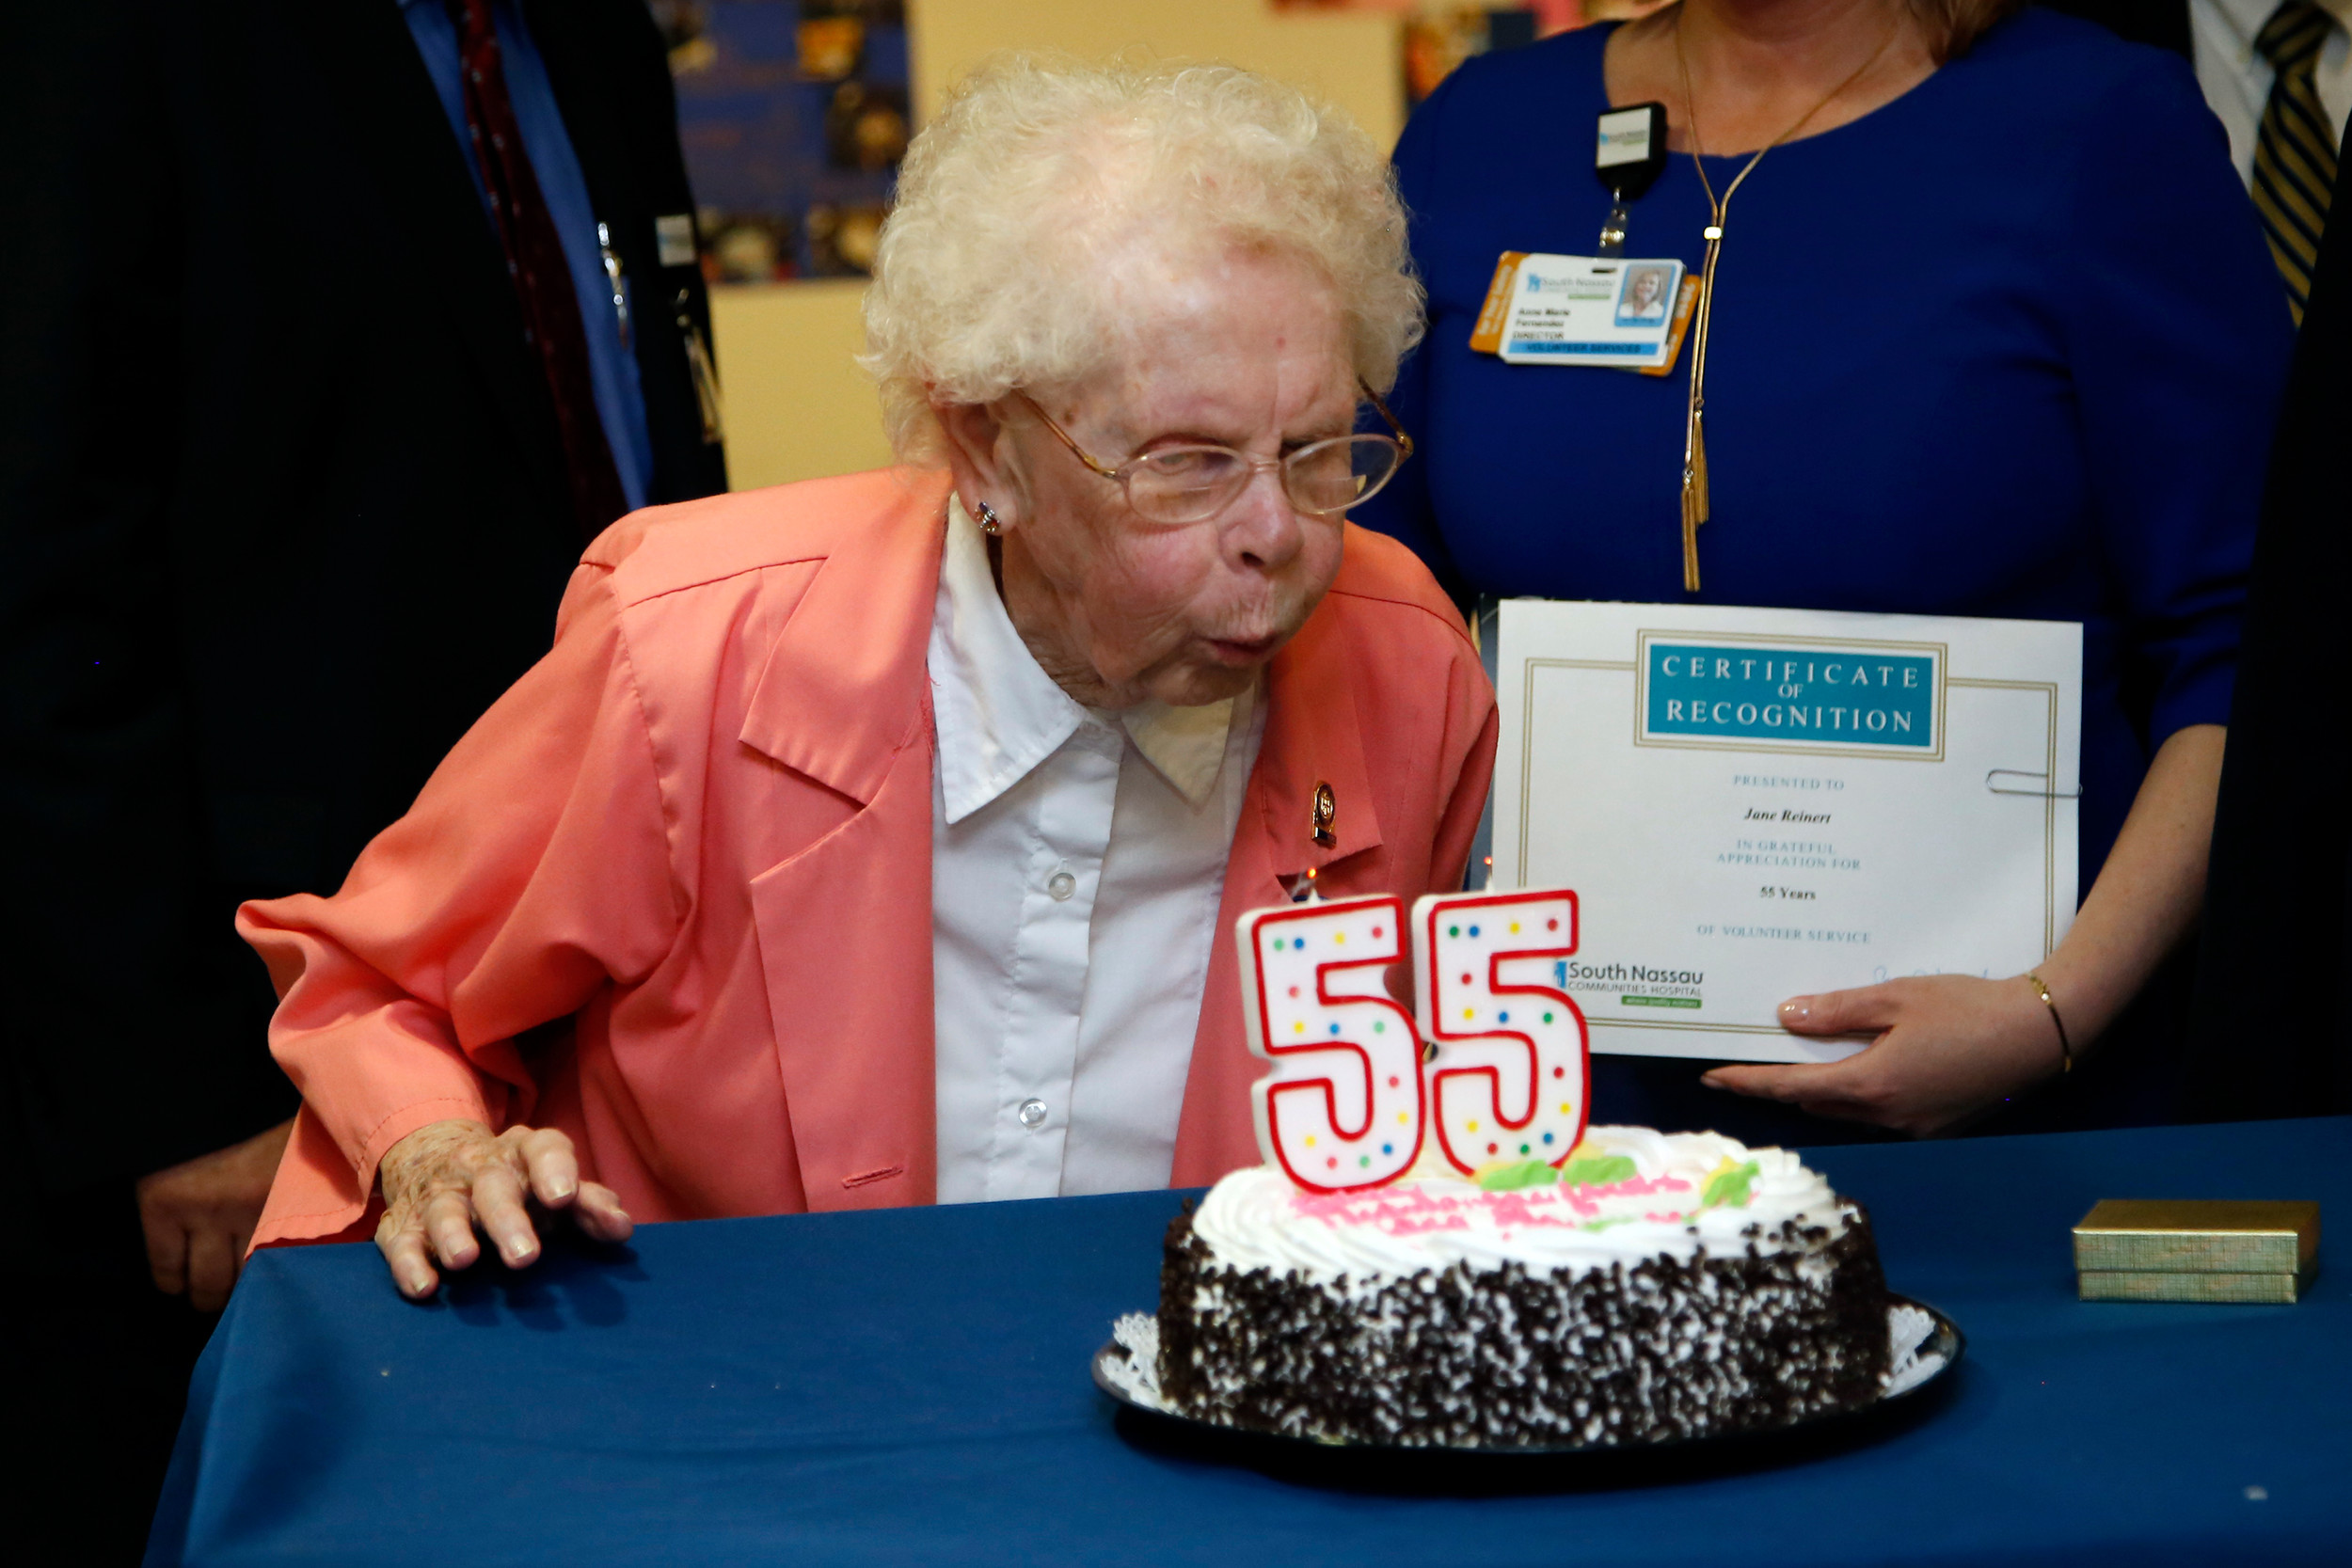 Oceanside resident Jane Reinert, who has logged more than 17,500 hours as a volunteer at South Nassau Communities Hospital, was honored with a cake at a special luncheon on April 26.